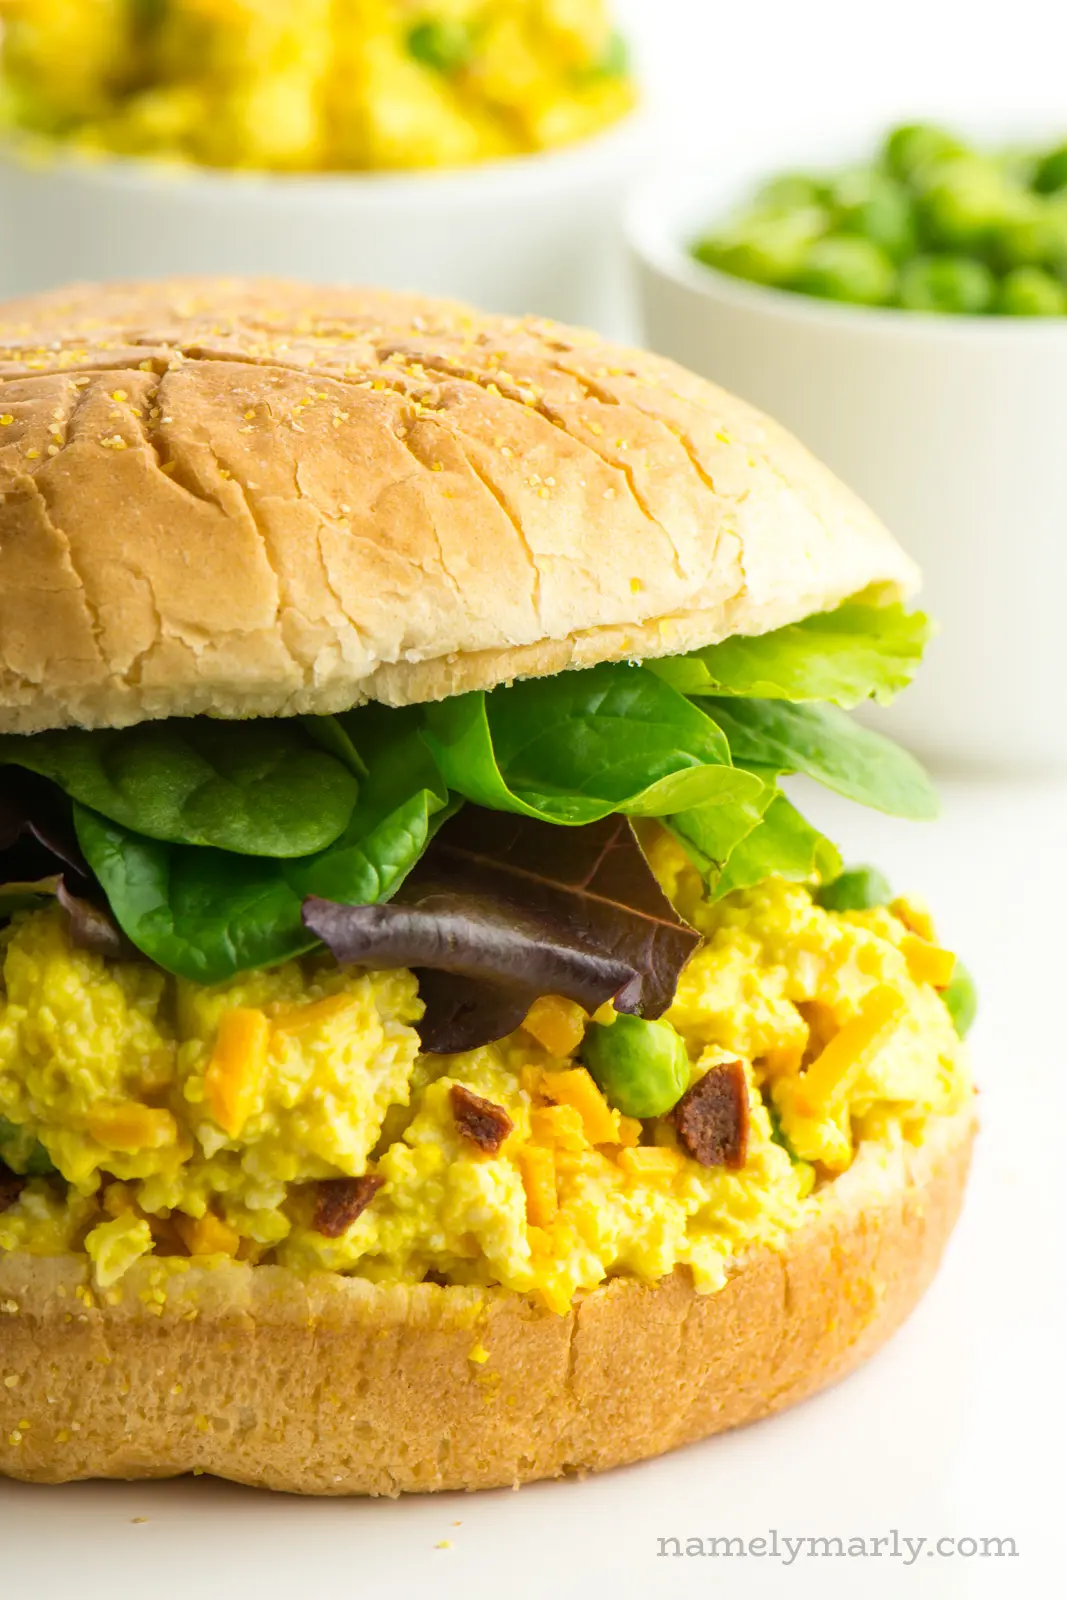 a closer look at the vegan egg salad recipe showing all the tasty and colorful ingredients.